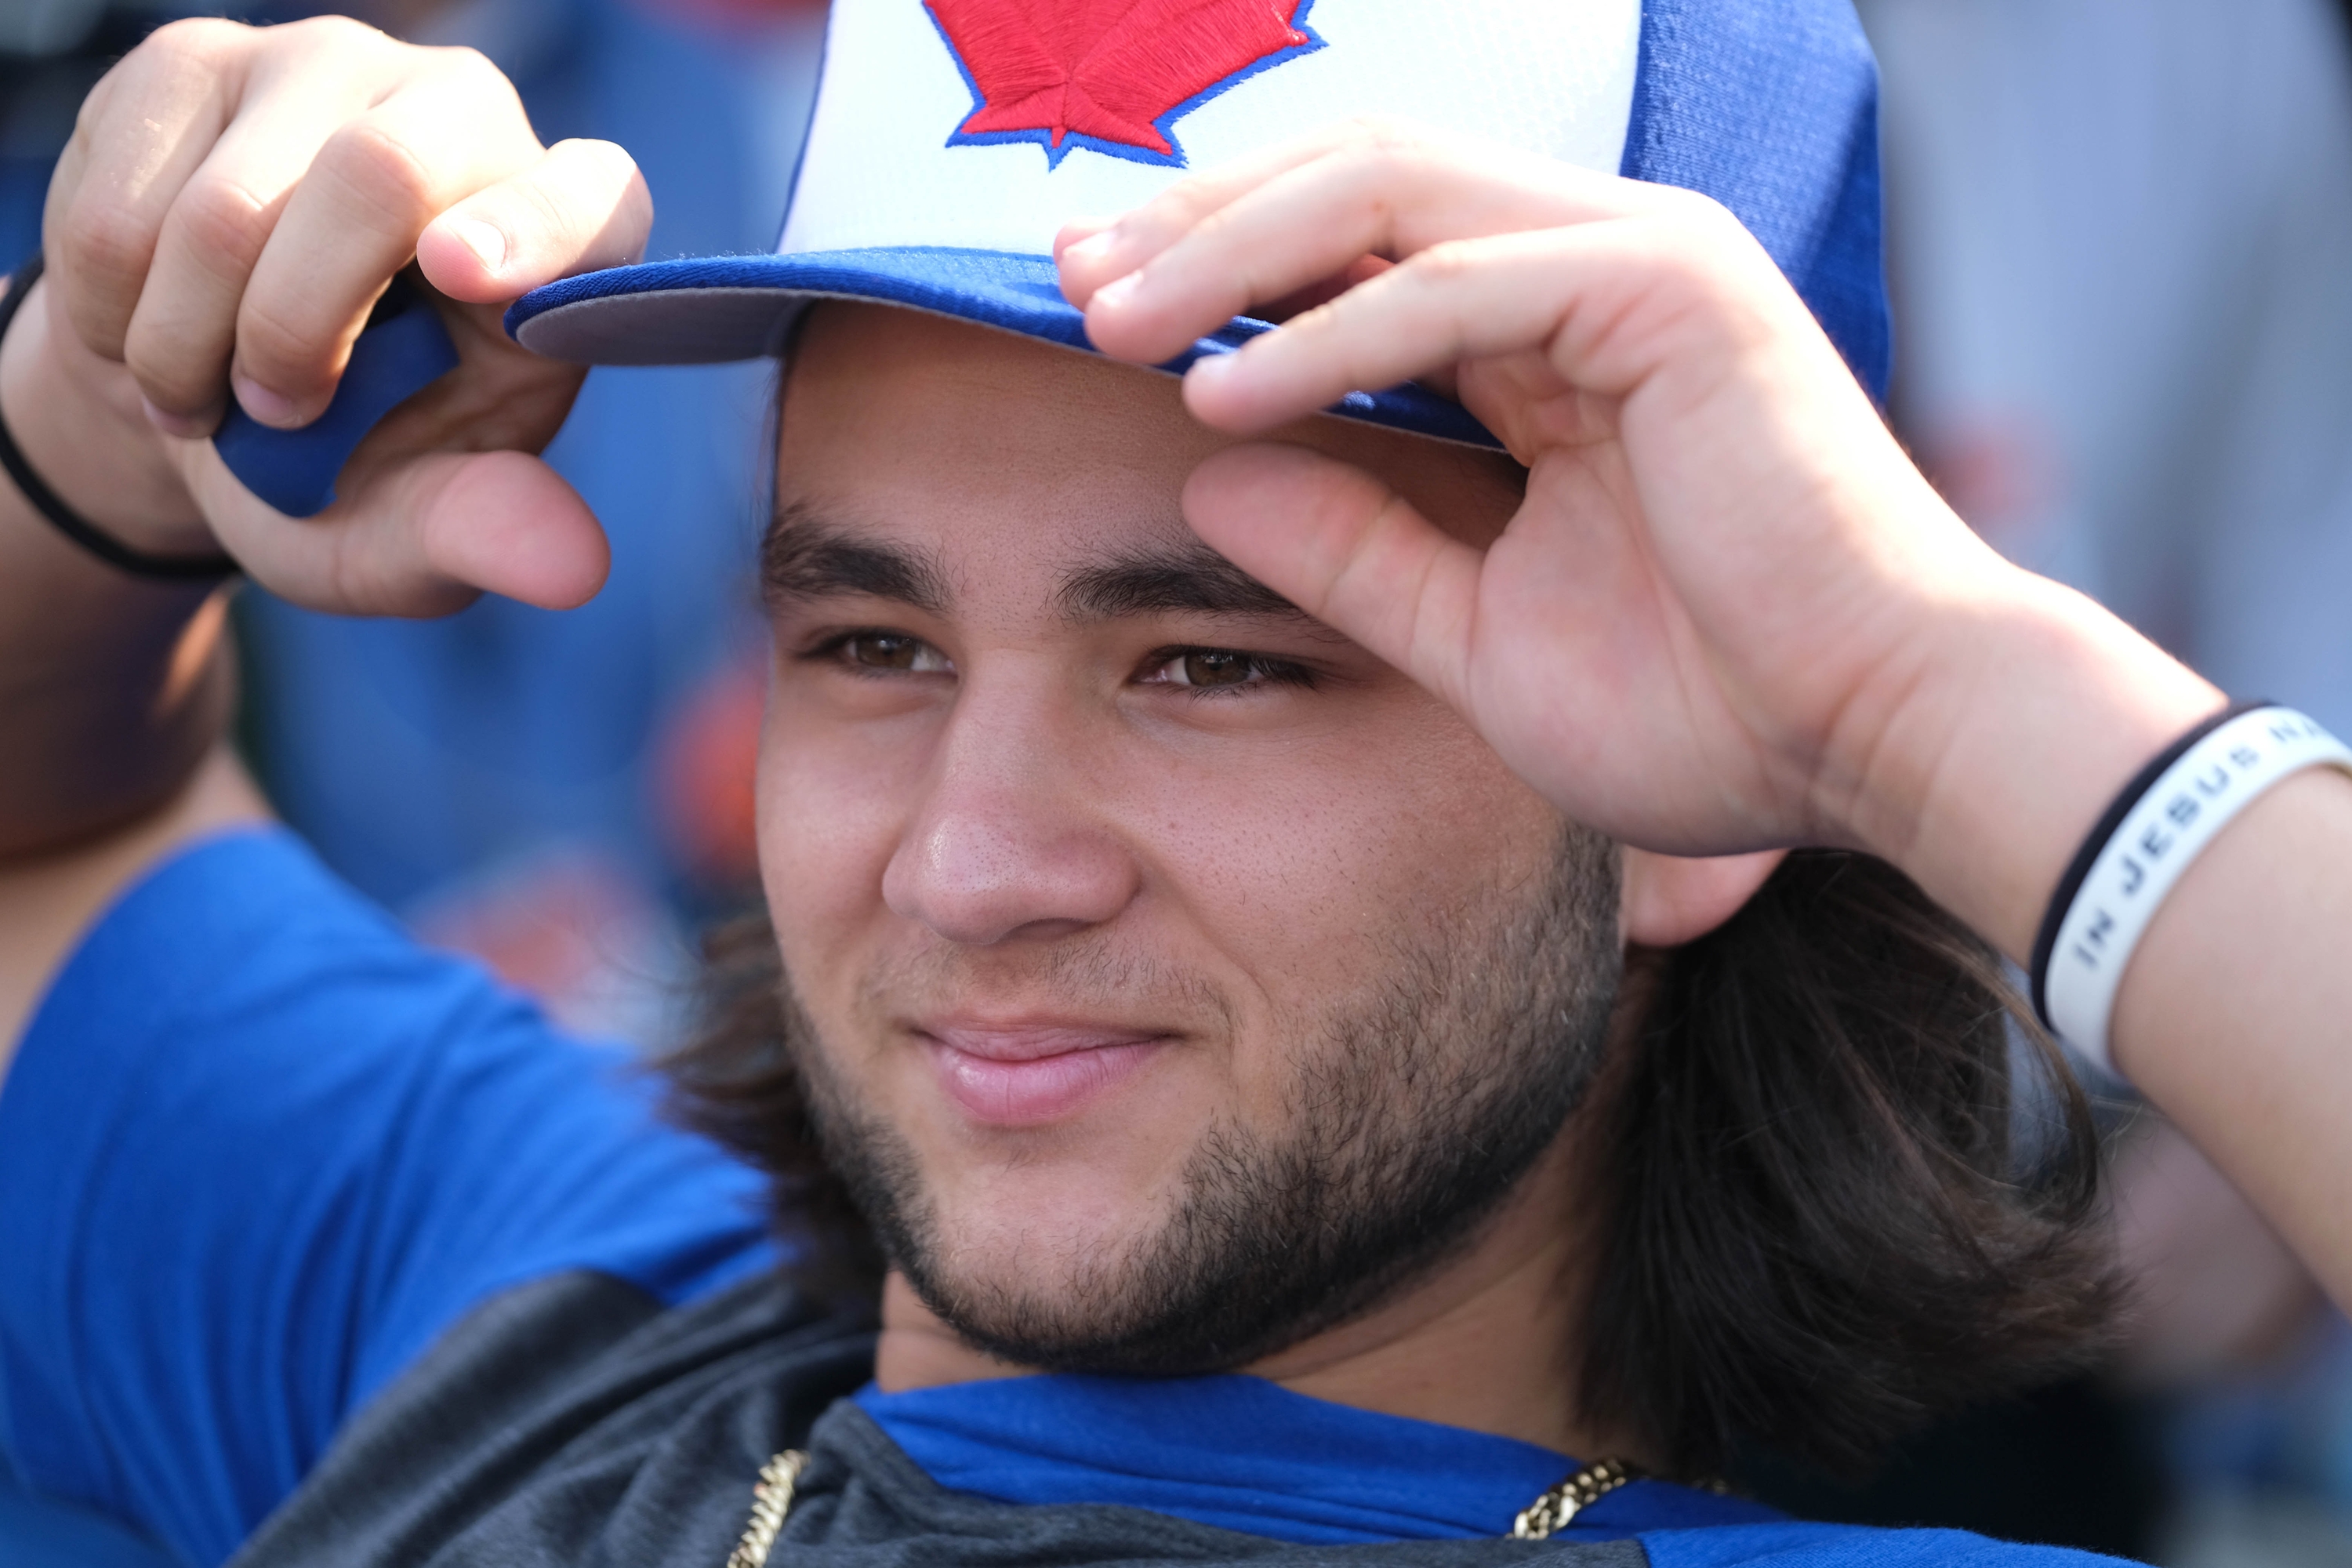 Relaxed Bichette 'just out here playing ball, having fun' in